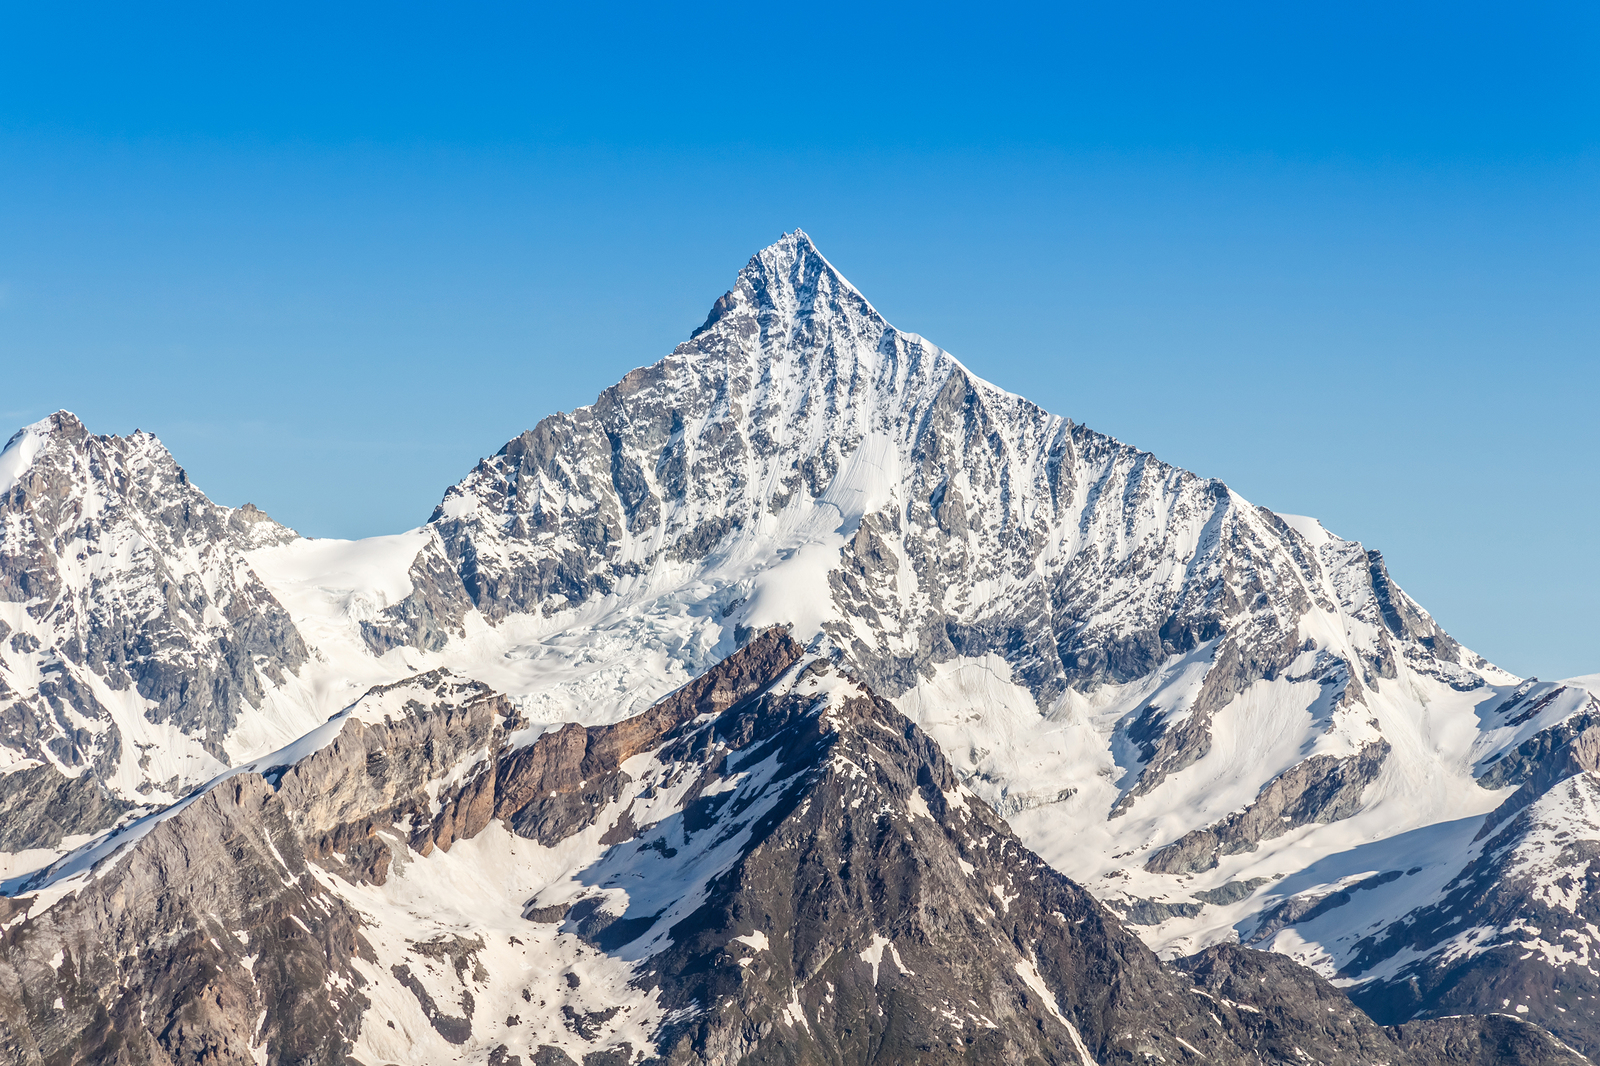 5 Awesome Facts About the Alps Everyone Should Know - Alps2Alps